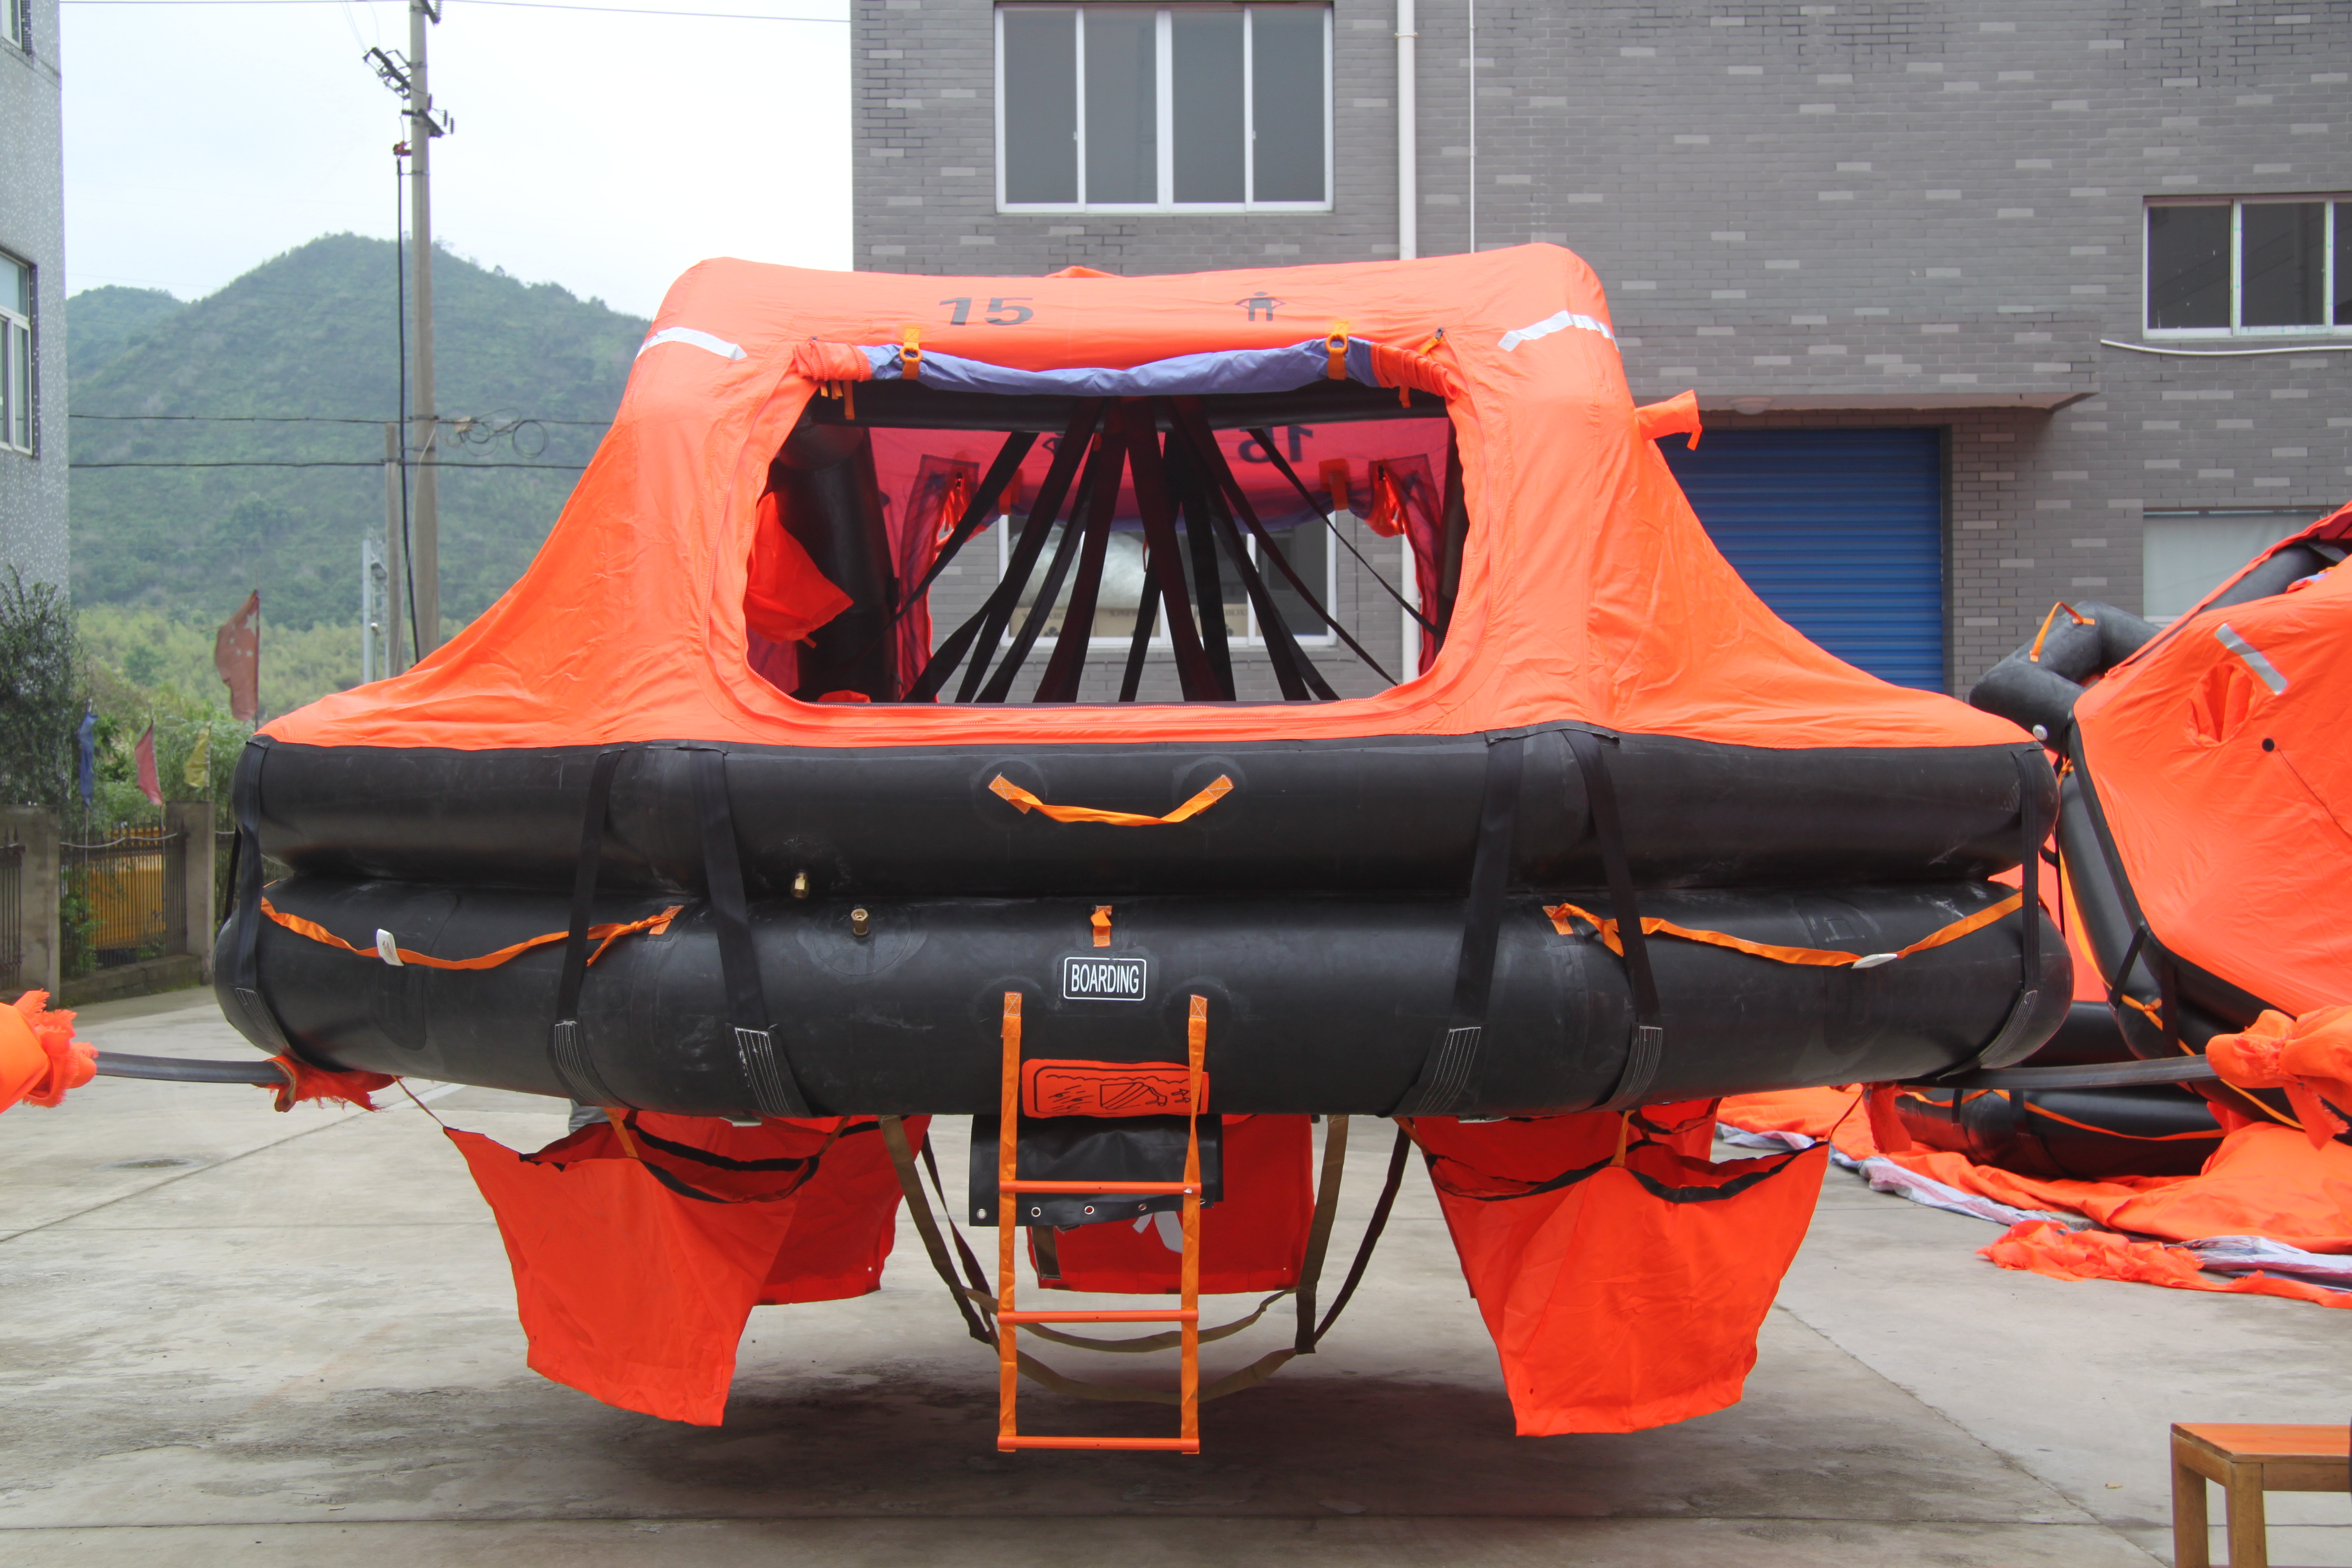 20 Persons Ship Use Throw Over Board Inflatable Liferaft